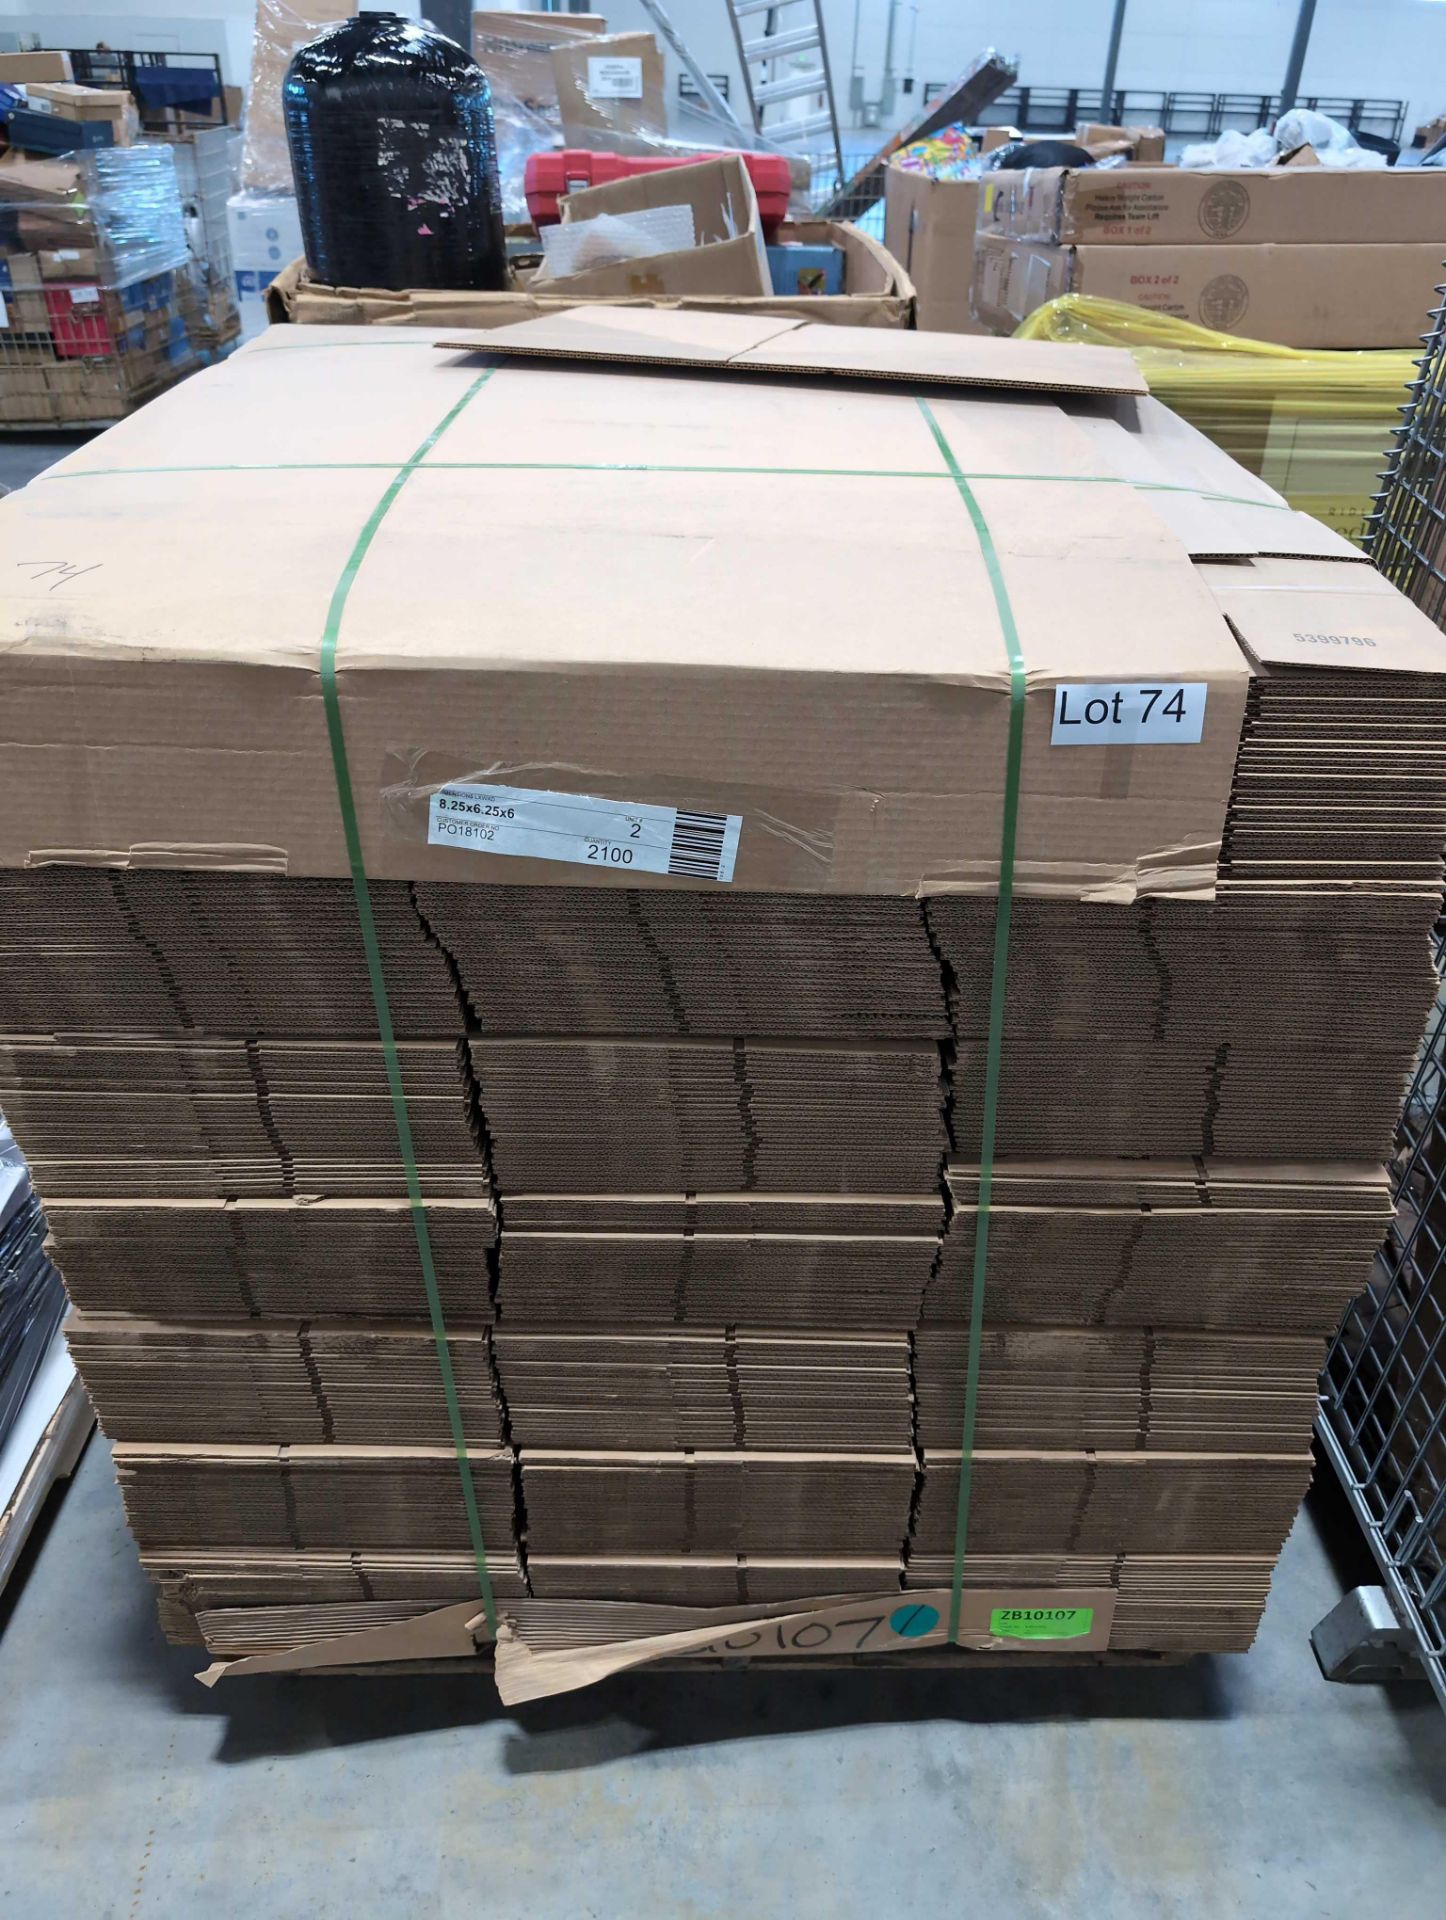 Pallet of boxes 8.25x6.25x6